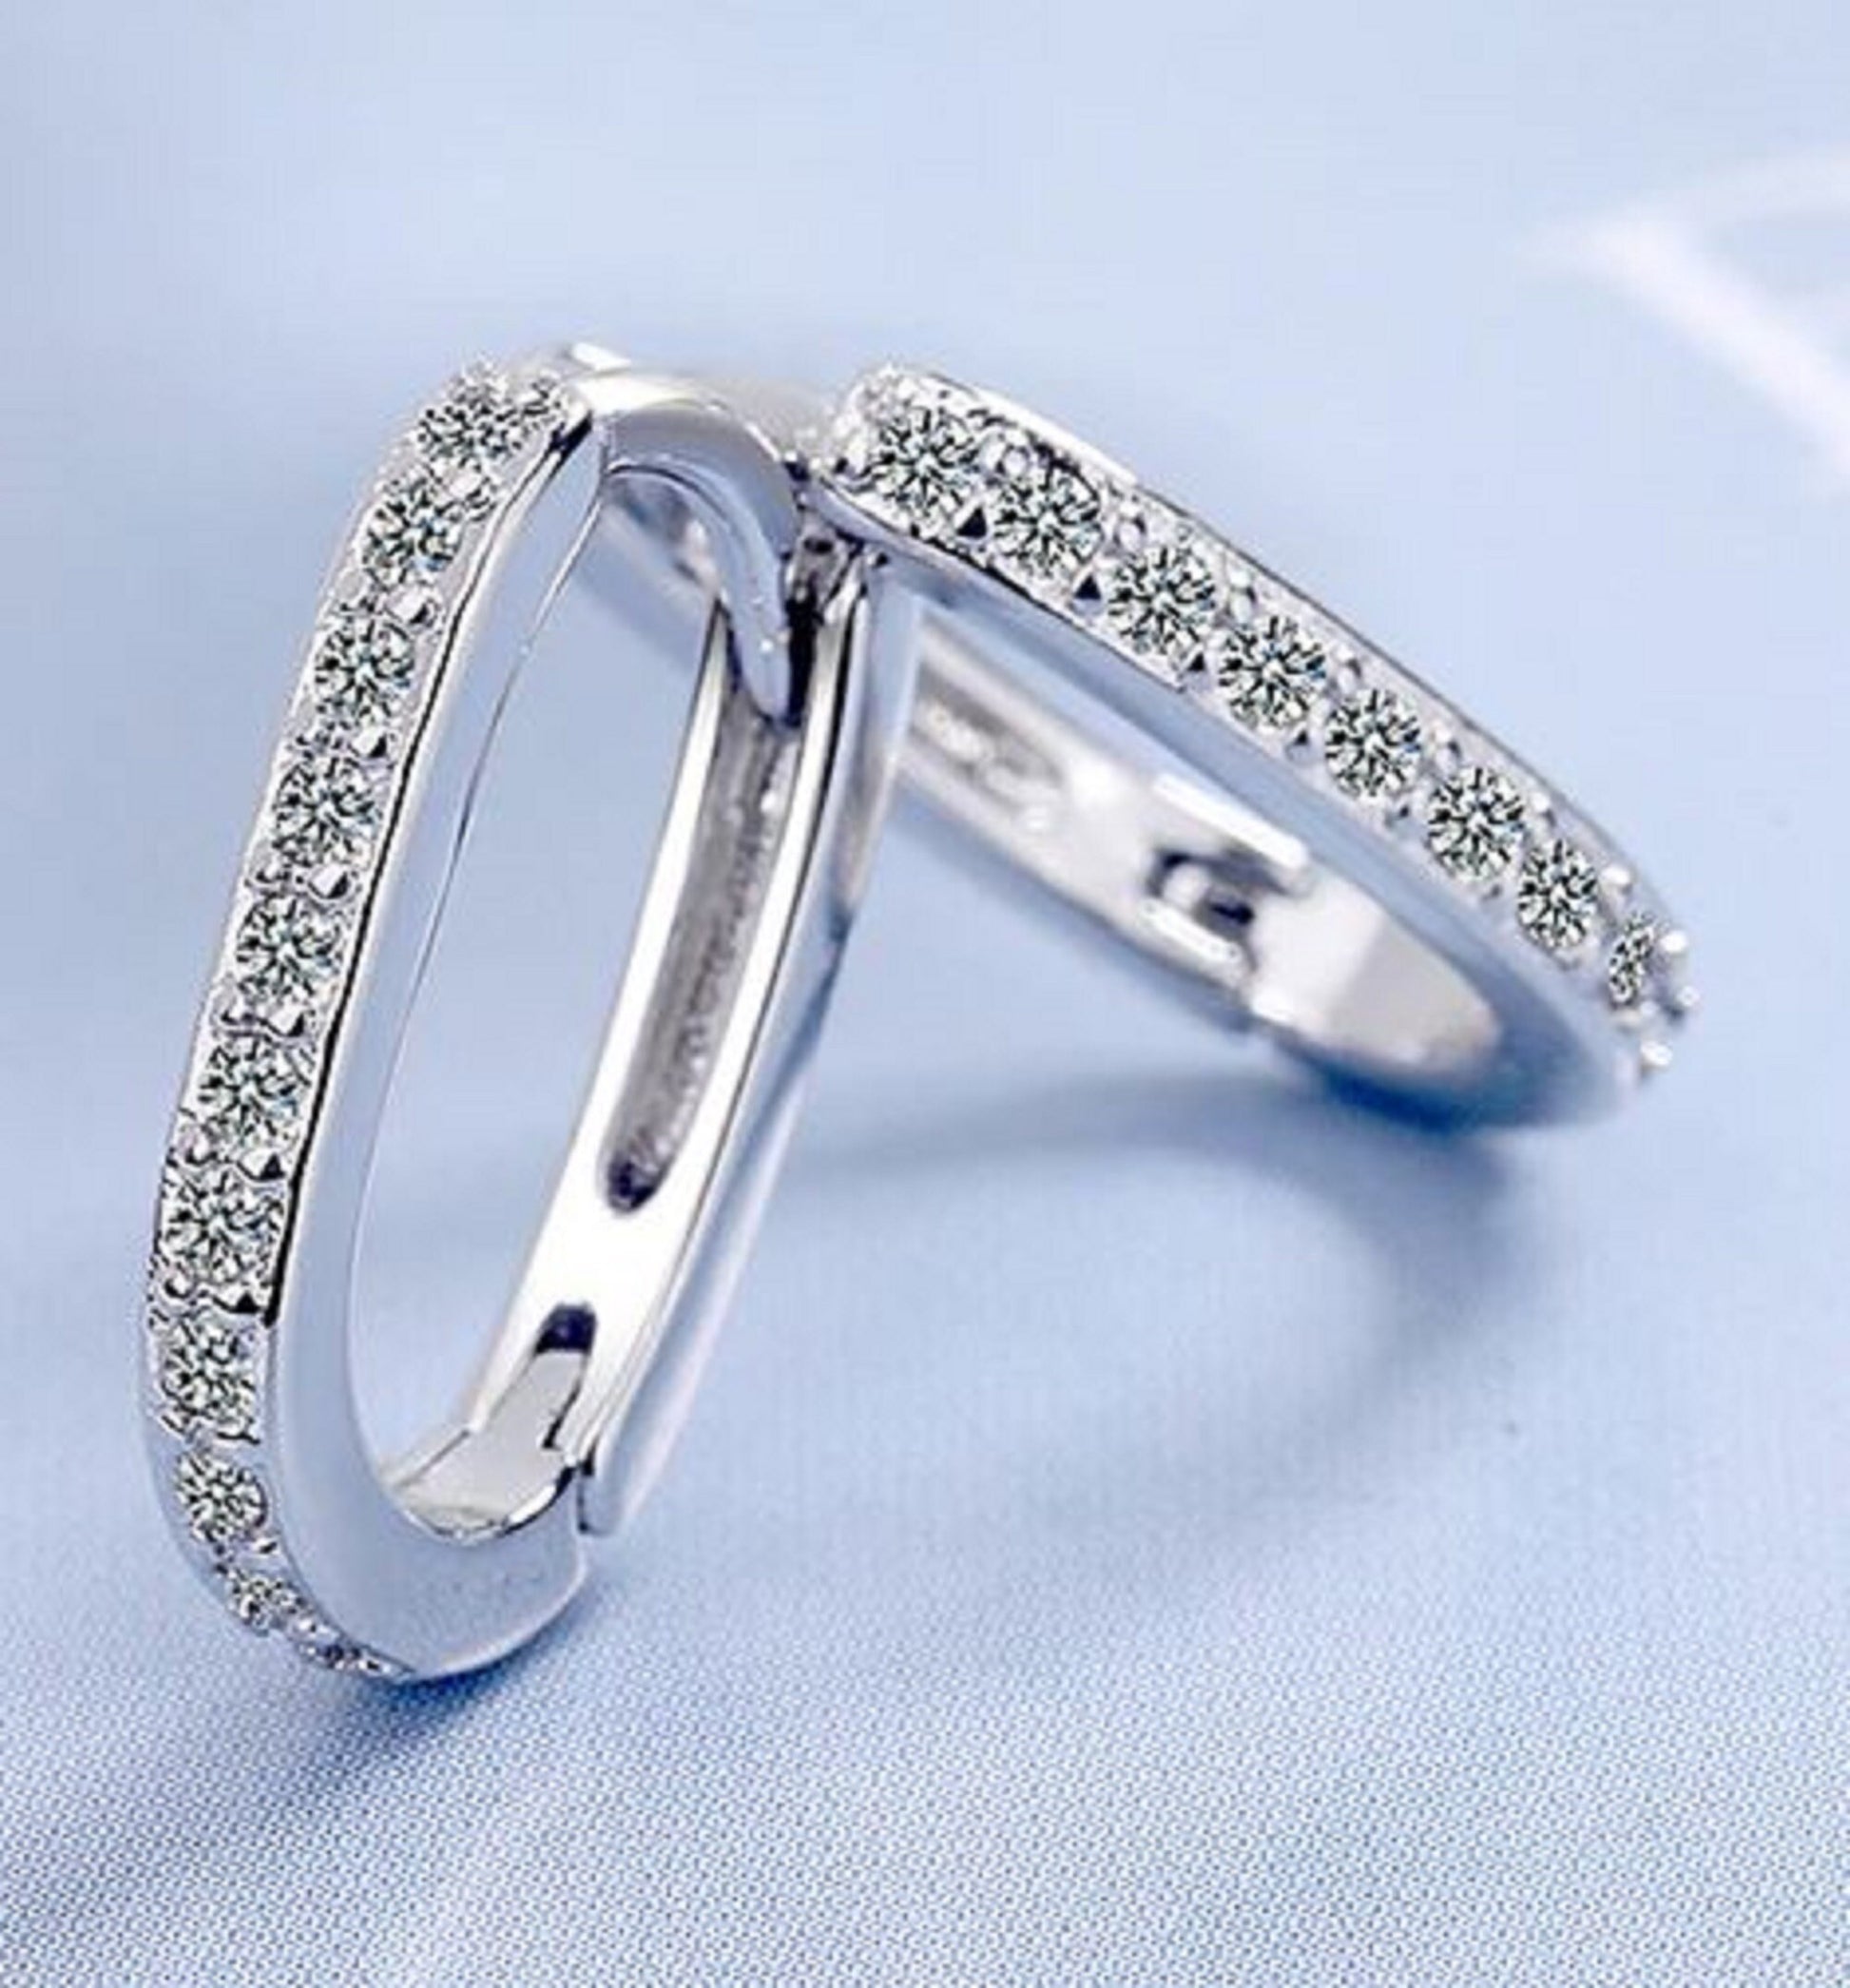 Sterling Silver Cubic Zirconia Hoop Earrings Women Fashion Jewelry - Friendship, Promise, Mother's Day, Birthday, Just Because, Gift